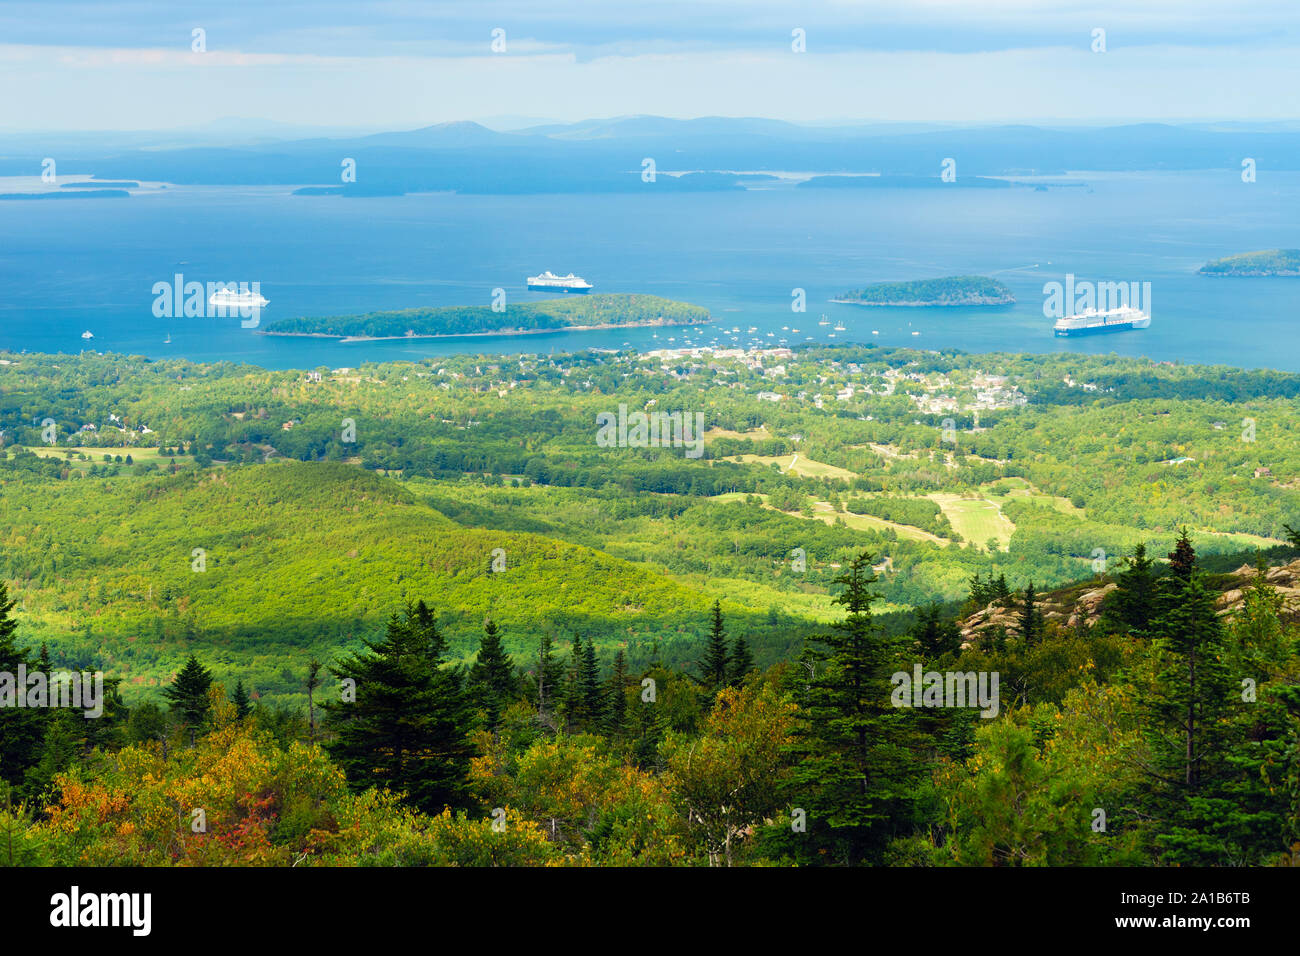 Cruise ships in Frenchman Bay, Bar Harbor, Maine, seen from the top of Cadillac Mountain, Acadia National Park. Stock Photo